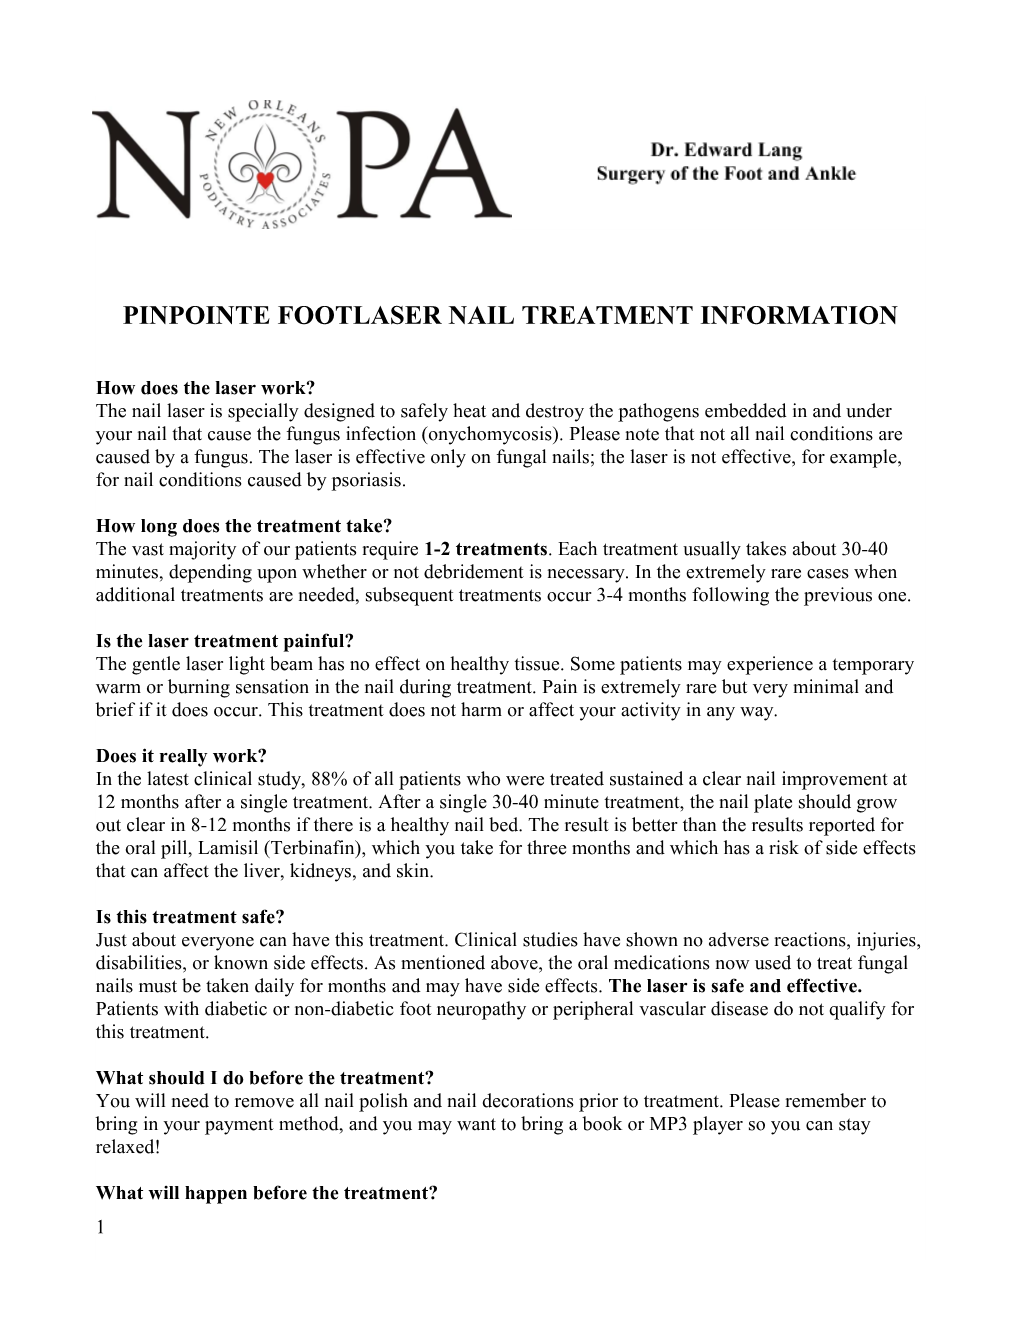 Pinpointe Footlaser Nail Treatment Information